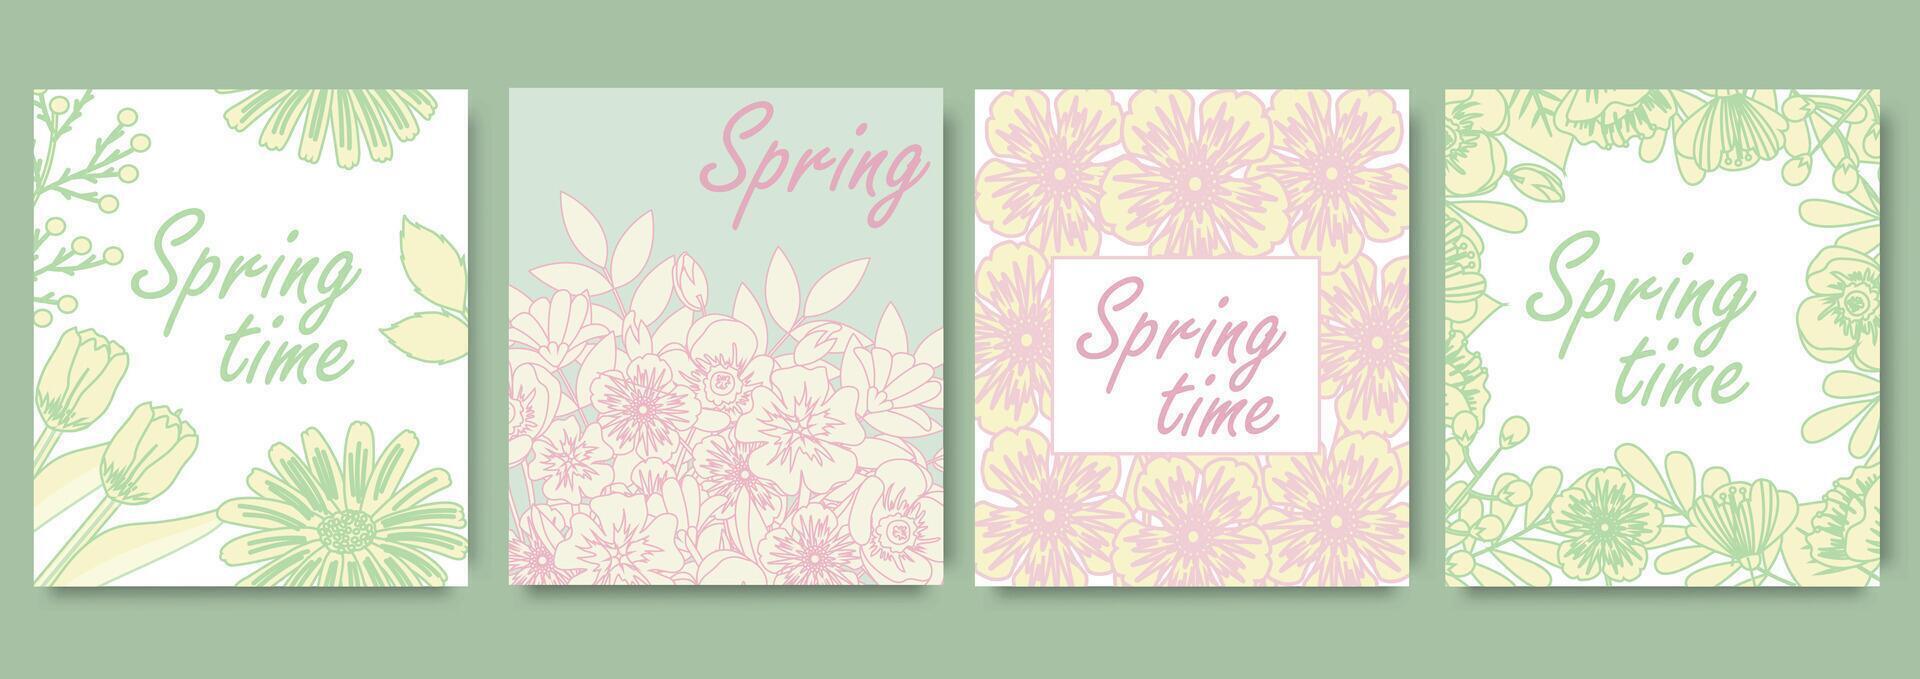 Floral art templates with hand drawn spring flowers in pastel colors, soft green, pink and yellow. Set of frames for Women's Day, birthday and Mother's Day cards. Contemporary poster and background. vector